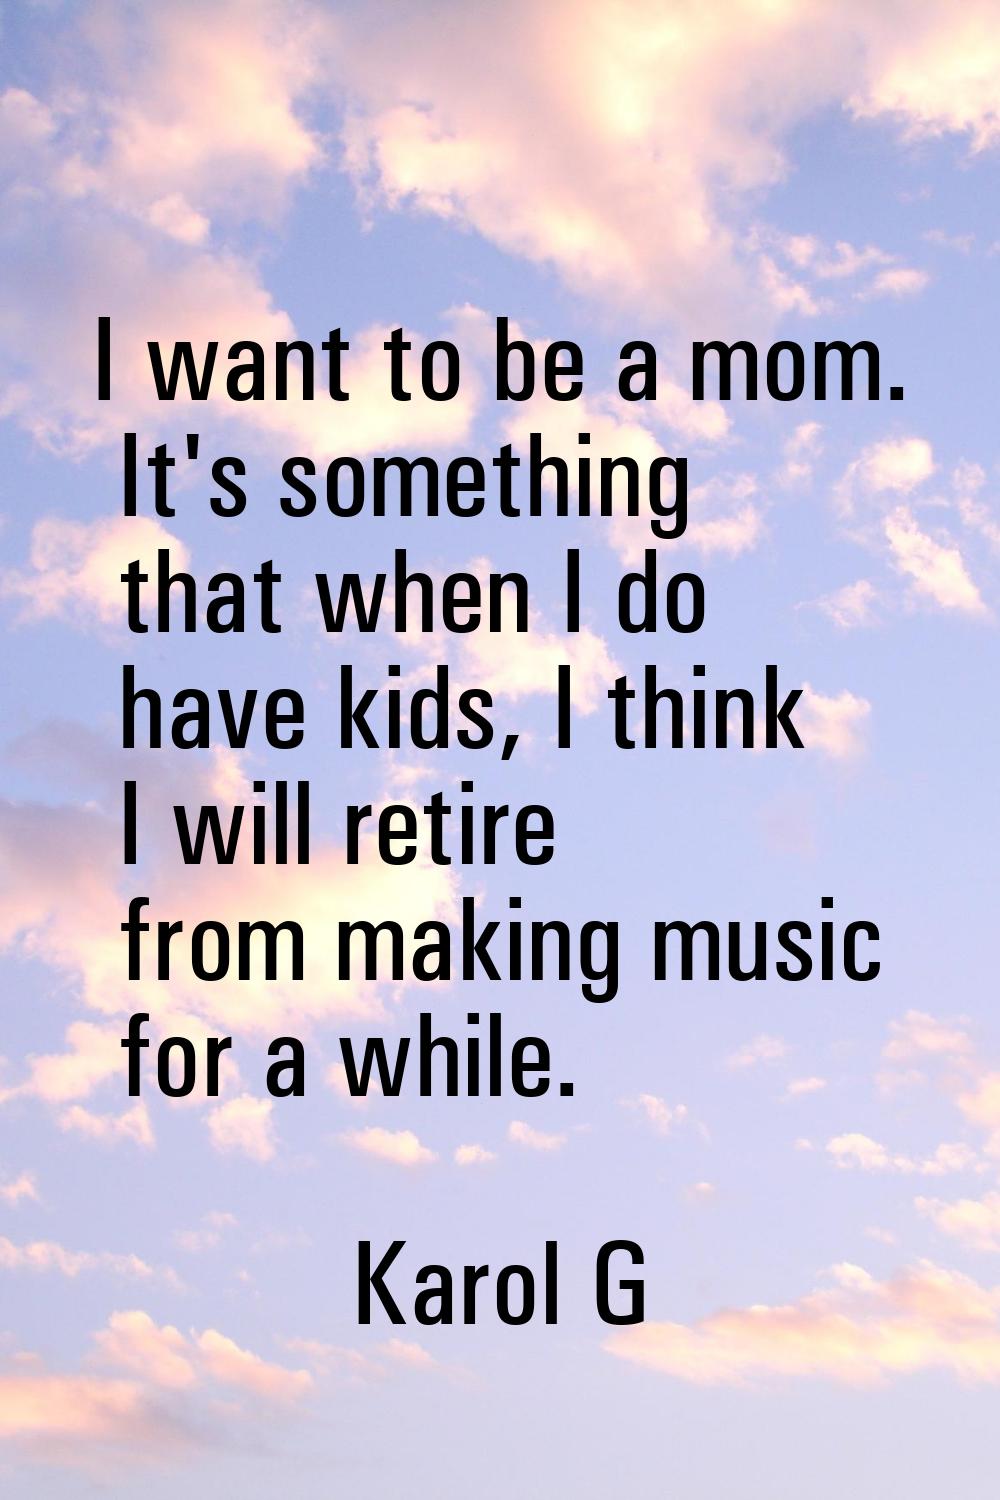 I want to be a mom. It's something that when I do have kids, I think I will retire from making musi